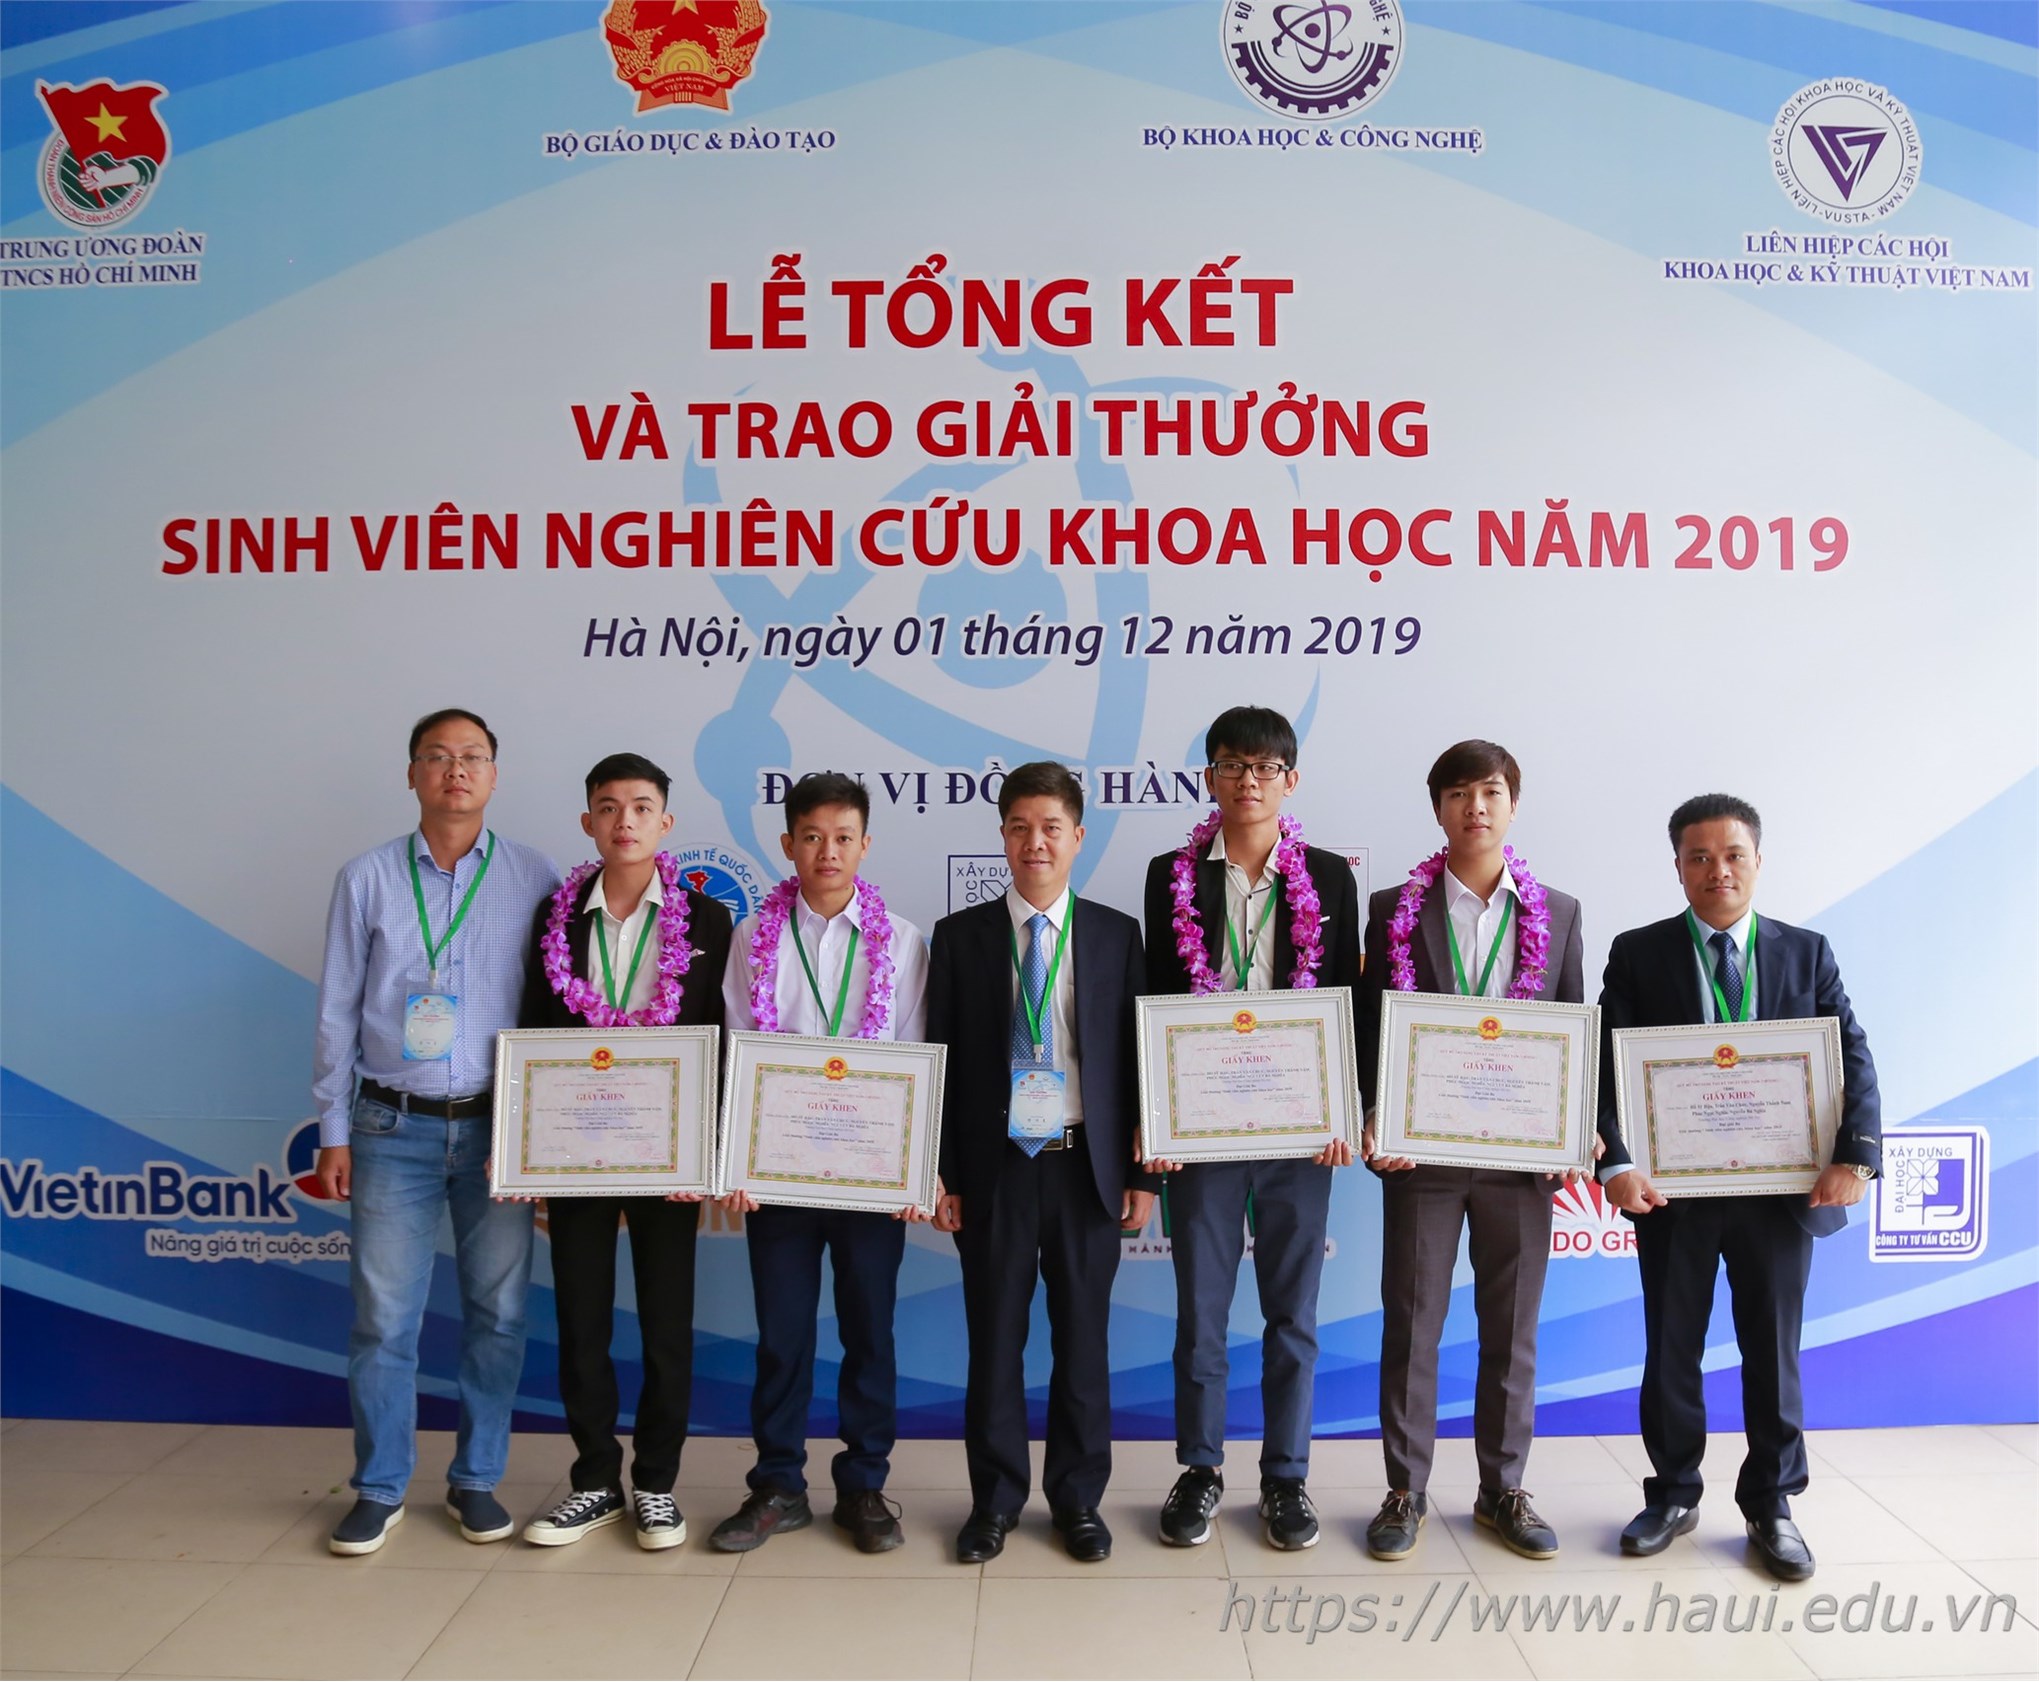 HaUI students won the Third prize at “Student Science Research 2019” Closing Ceremony